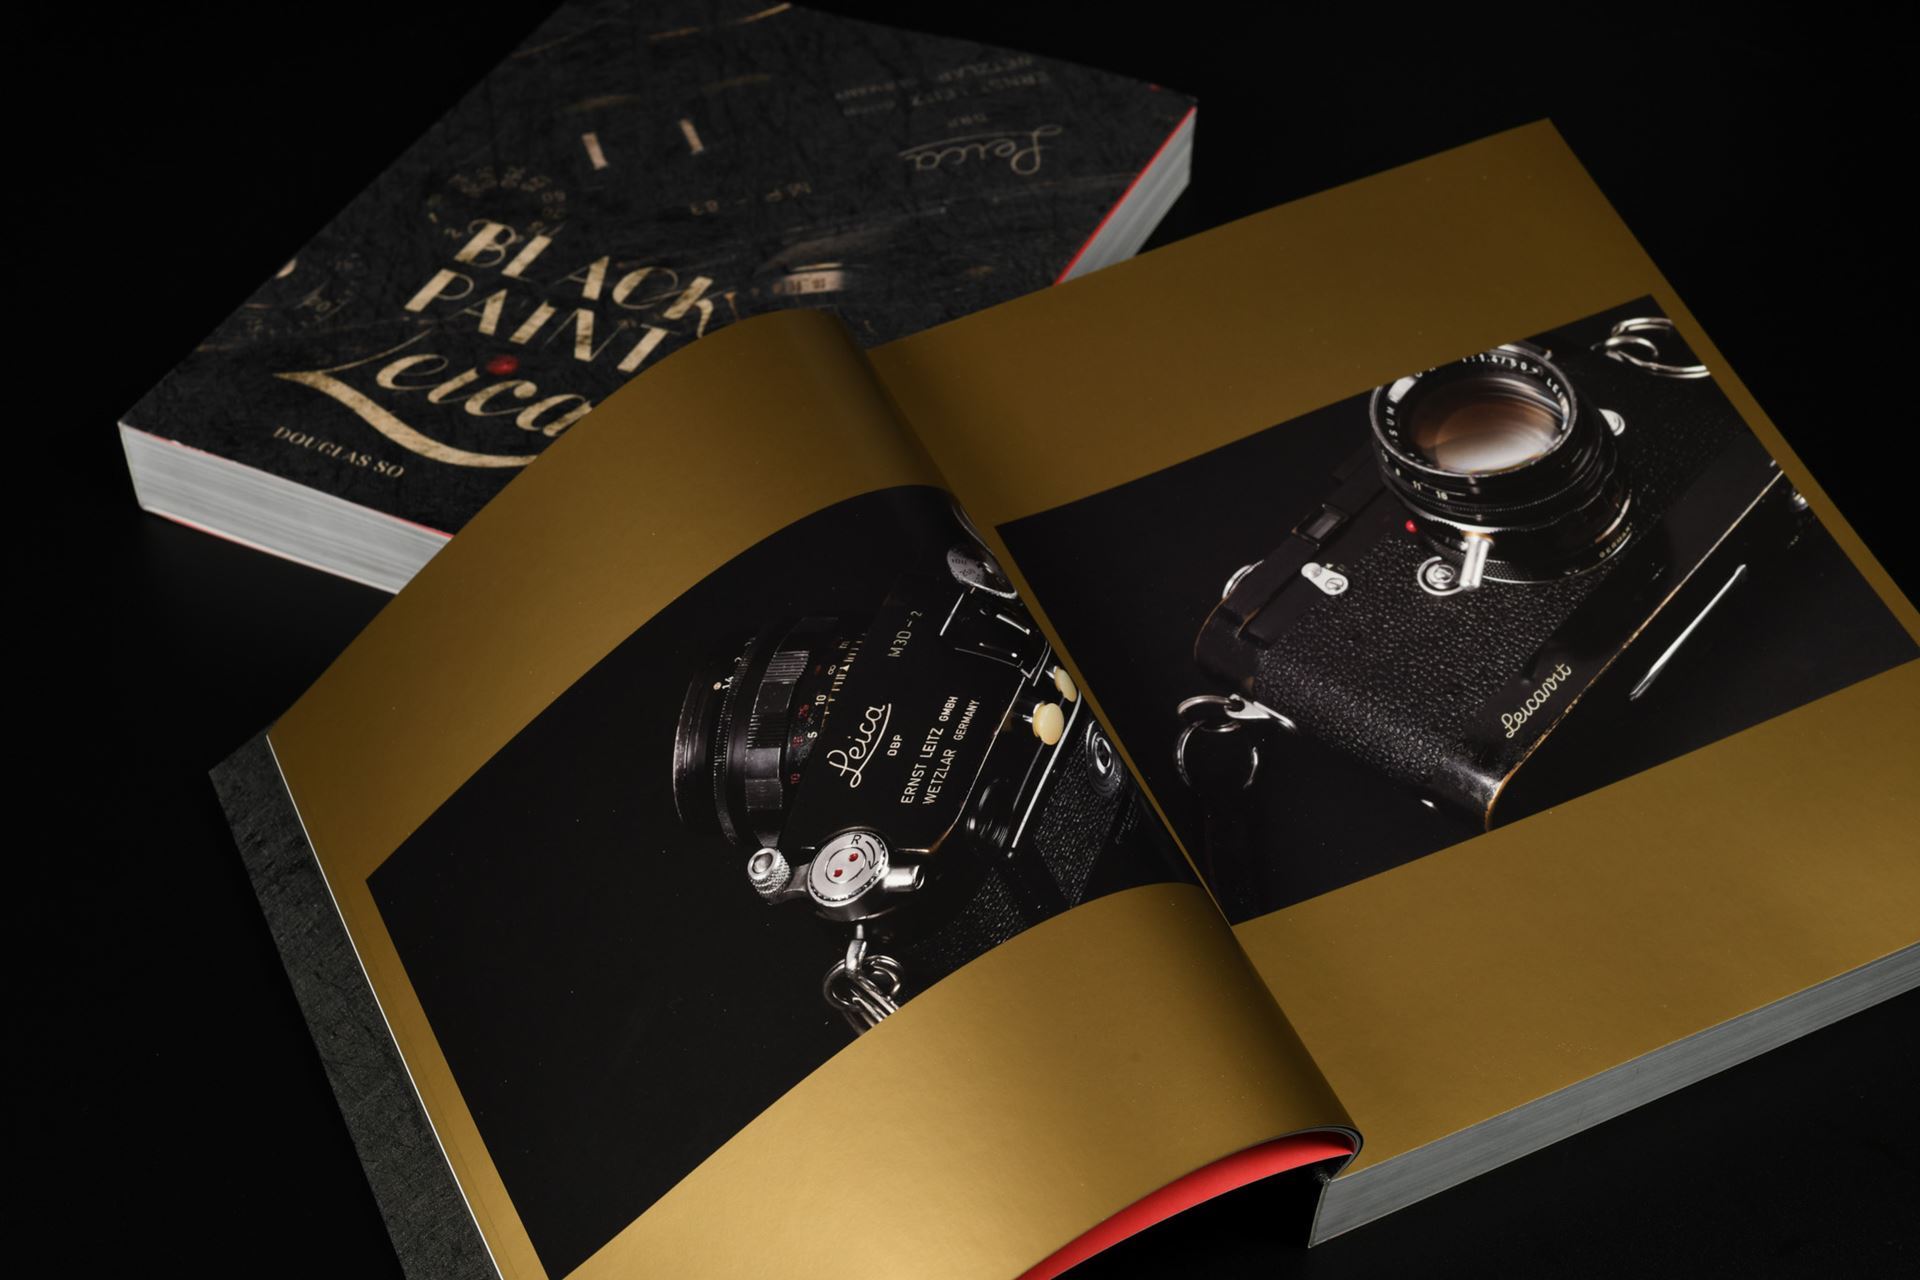 Picture of <Black Paint Leica> book